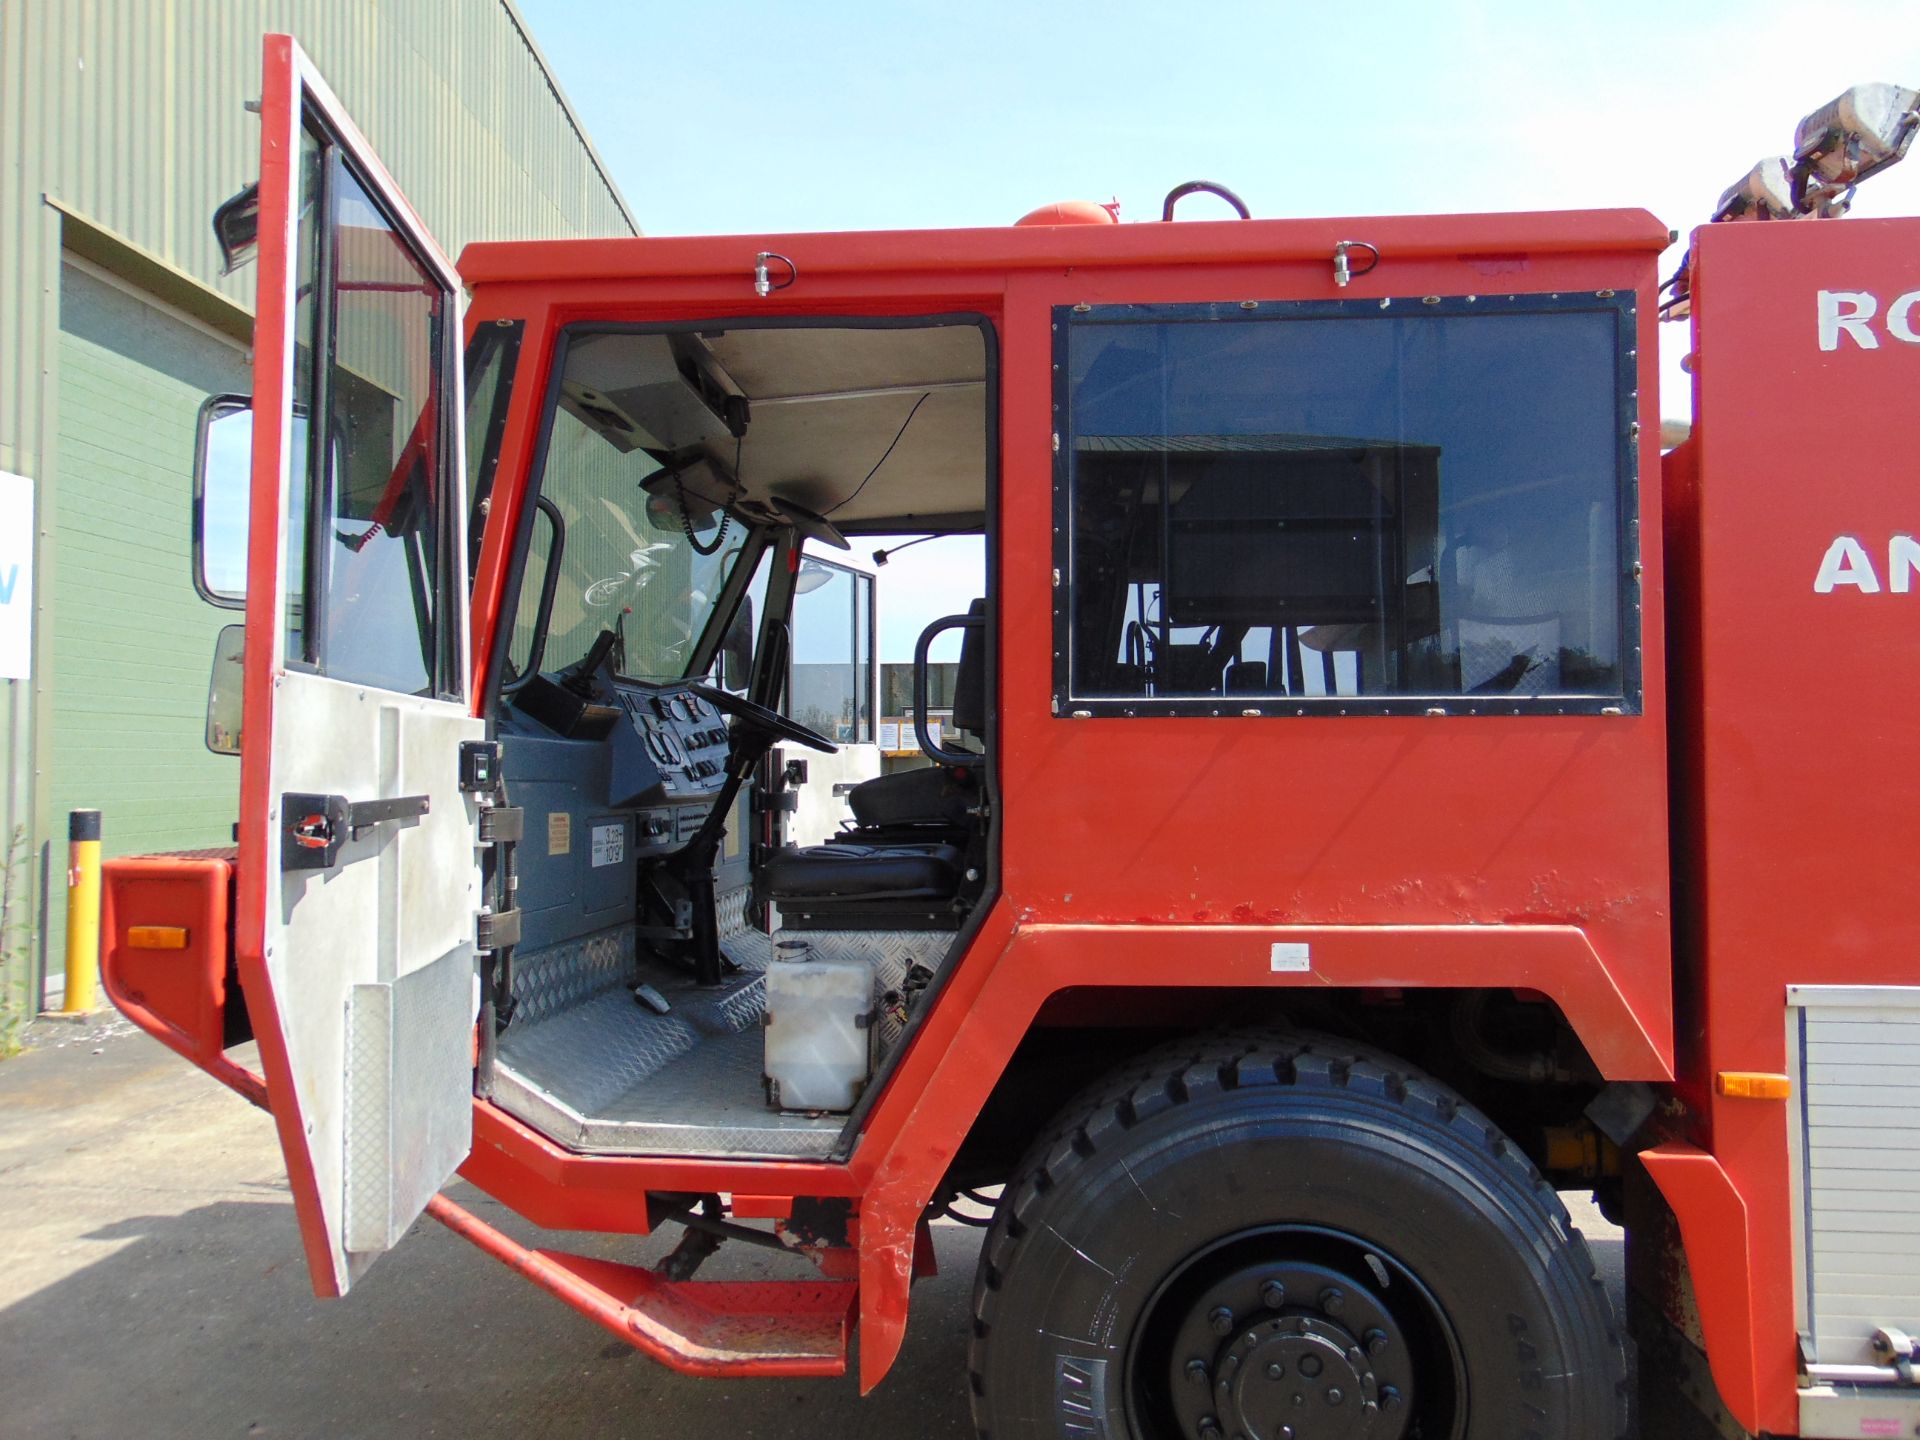 Unipower 4 x 4 Airport Fire Fighting Appliance - Rapid Intervention Vehicle - Image 48 of 73